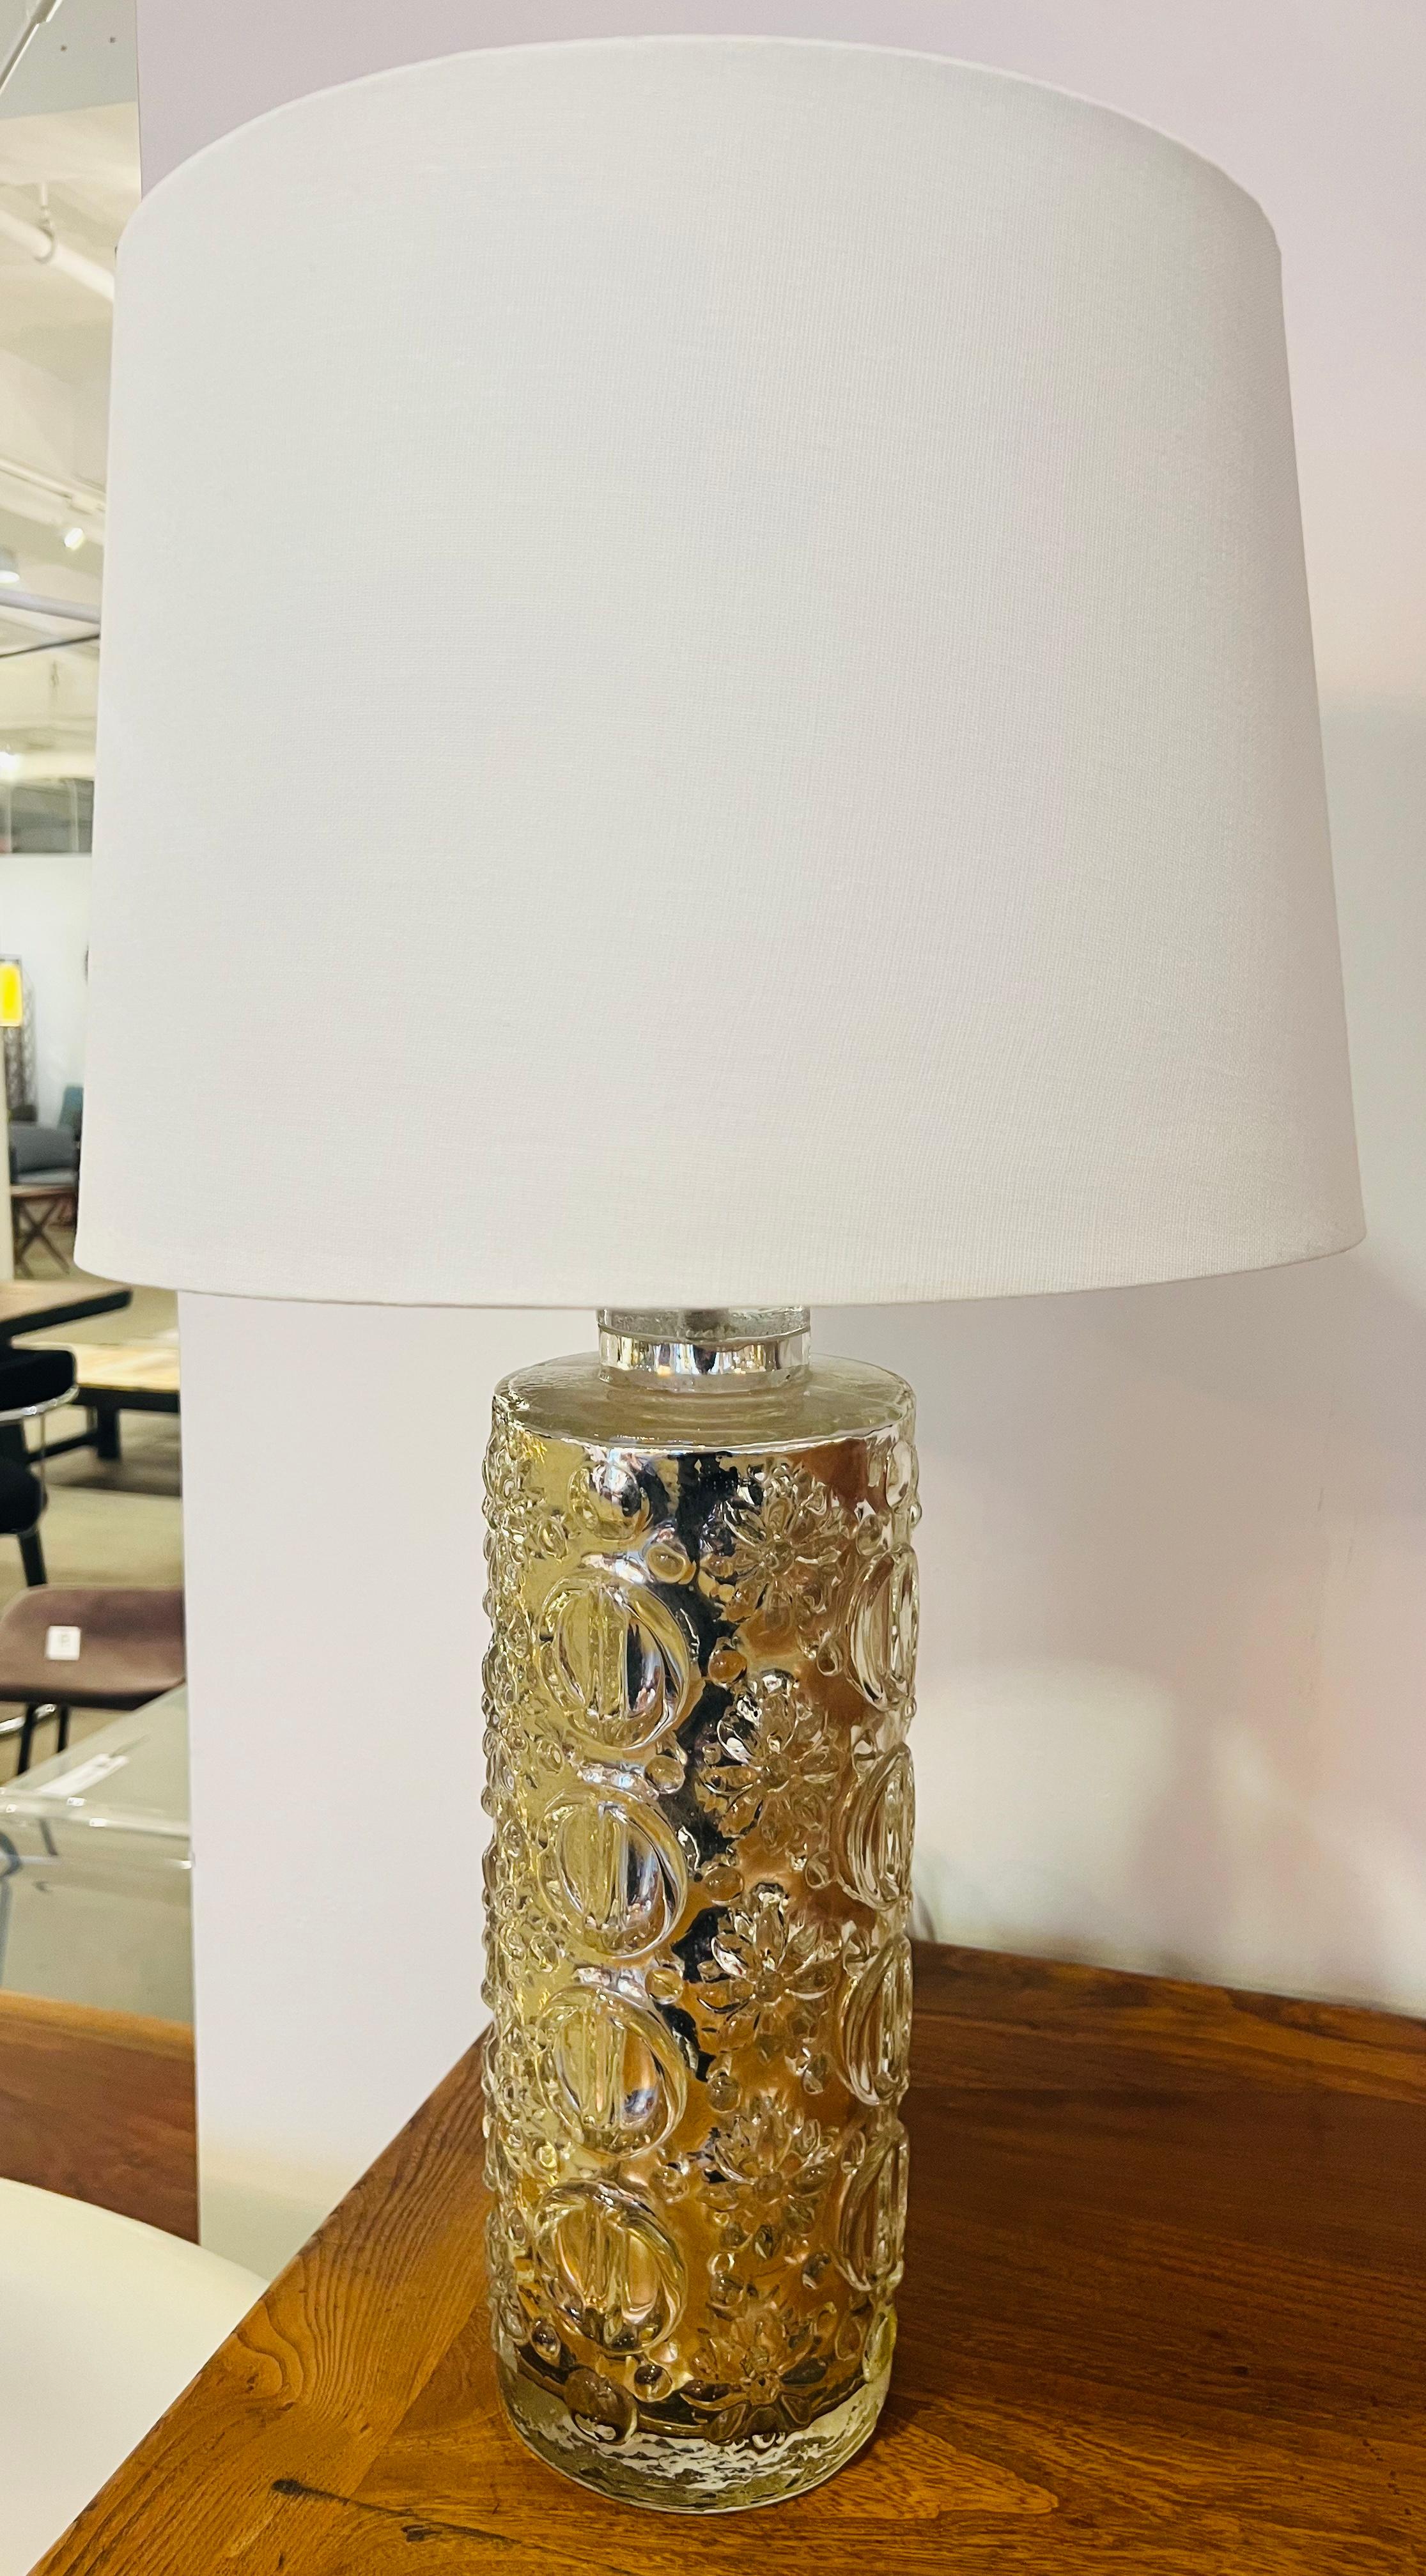 A beautiful silver mercury glass table lamp designed by Gistav Leeks for Orrefors. 1950. Rewired with polished nickel
Double sockets and white cloth cords.